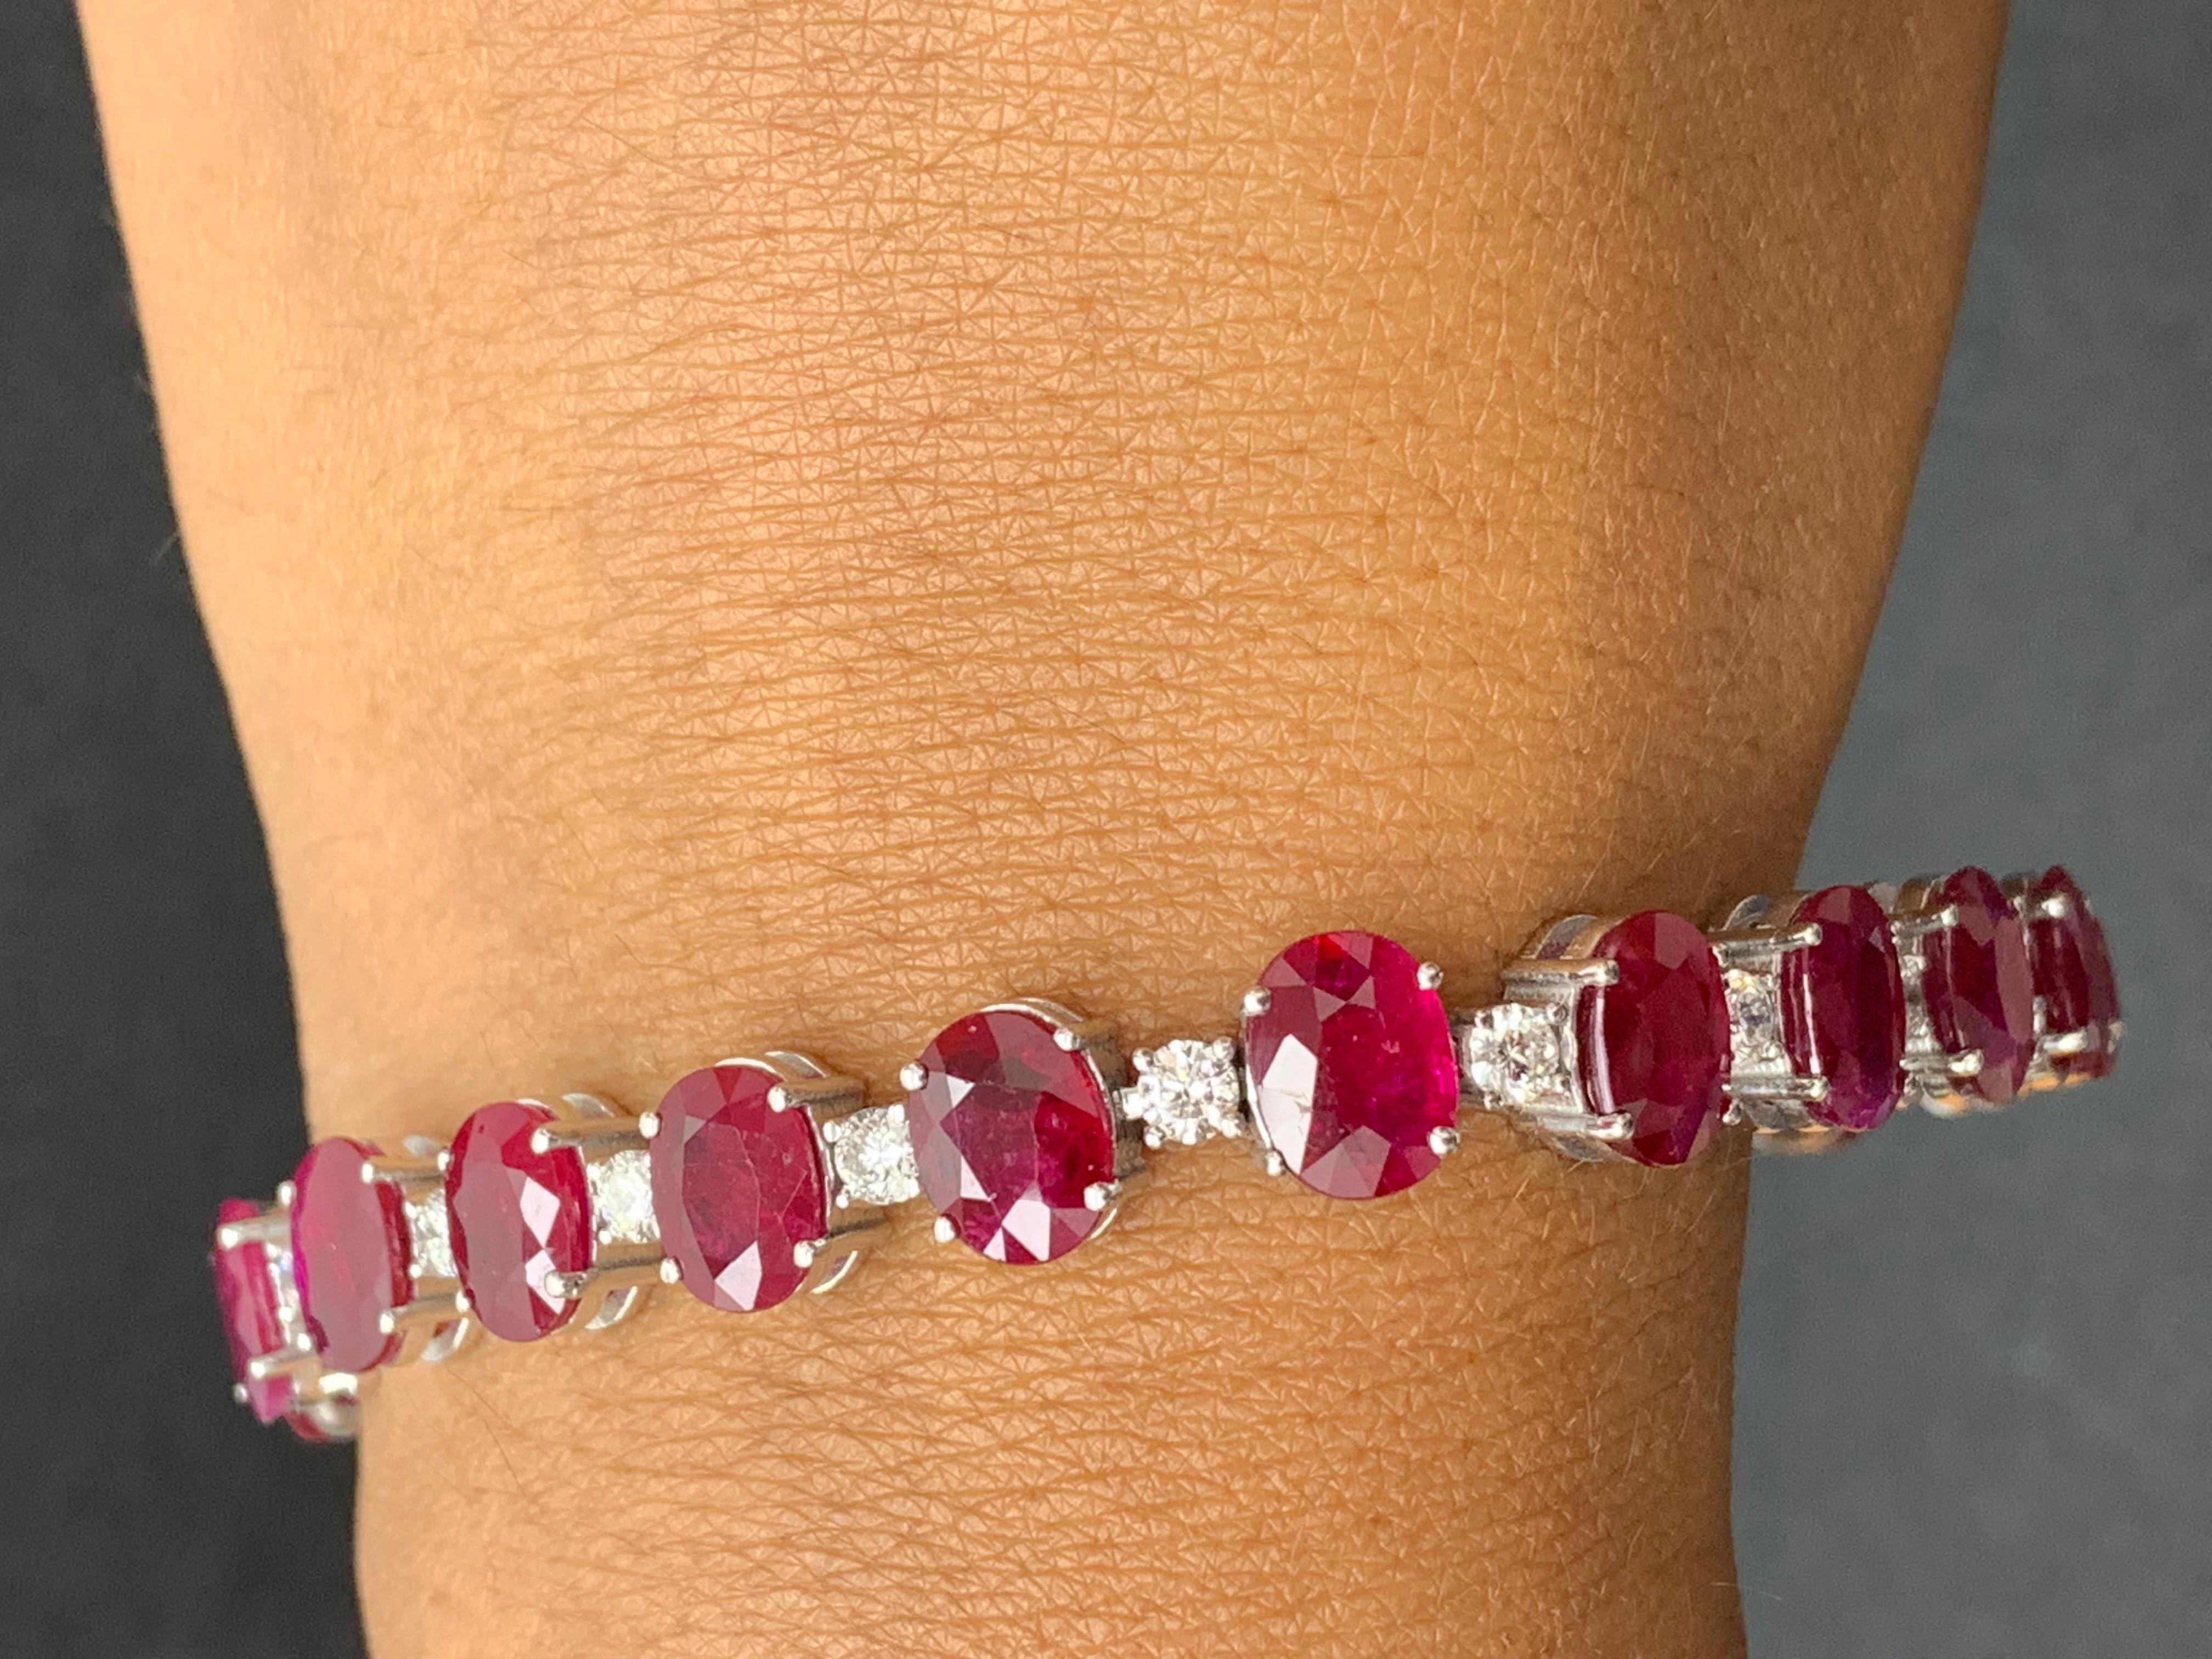 25.46 Carat Oval Cut Ruby and Diamond Tennis Bracelet in 14K White Gold For Sale 7